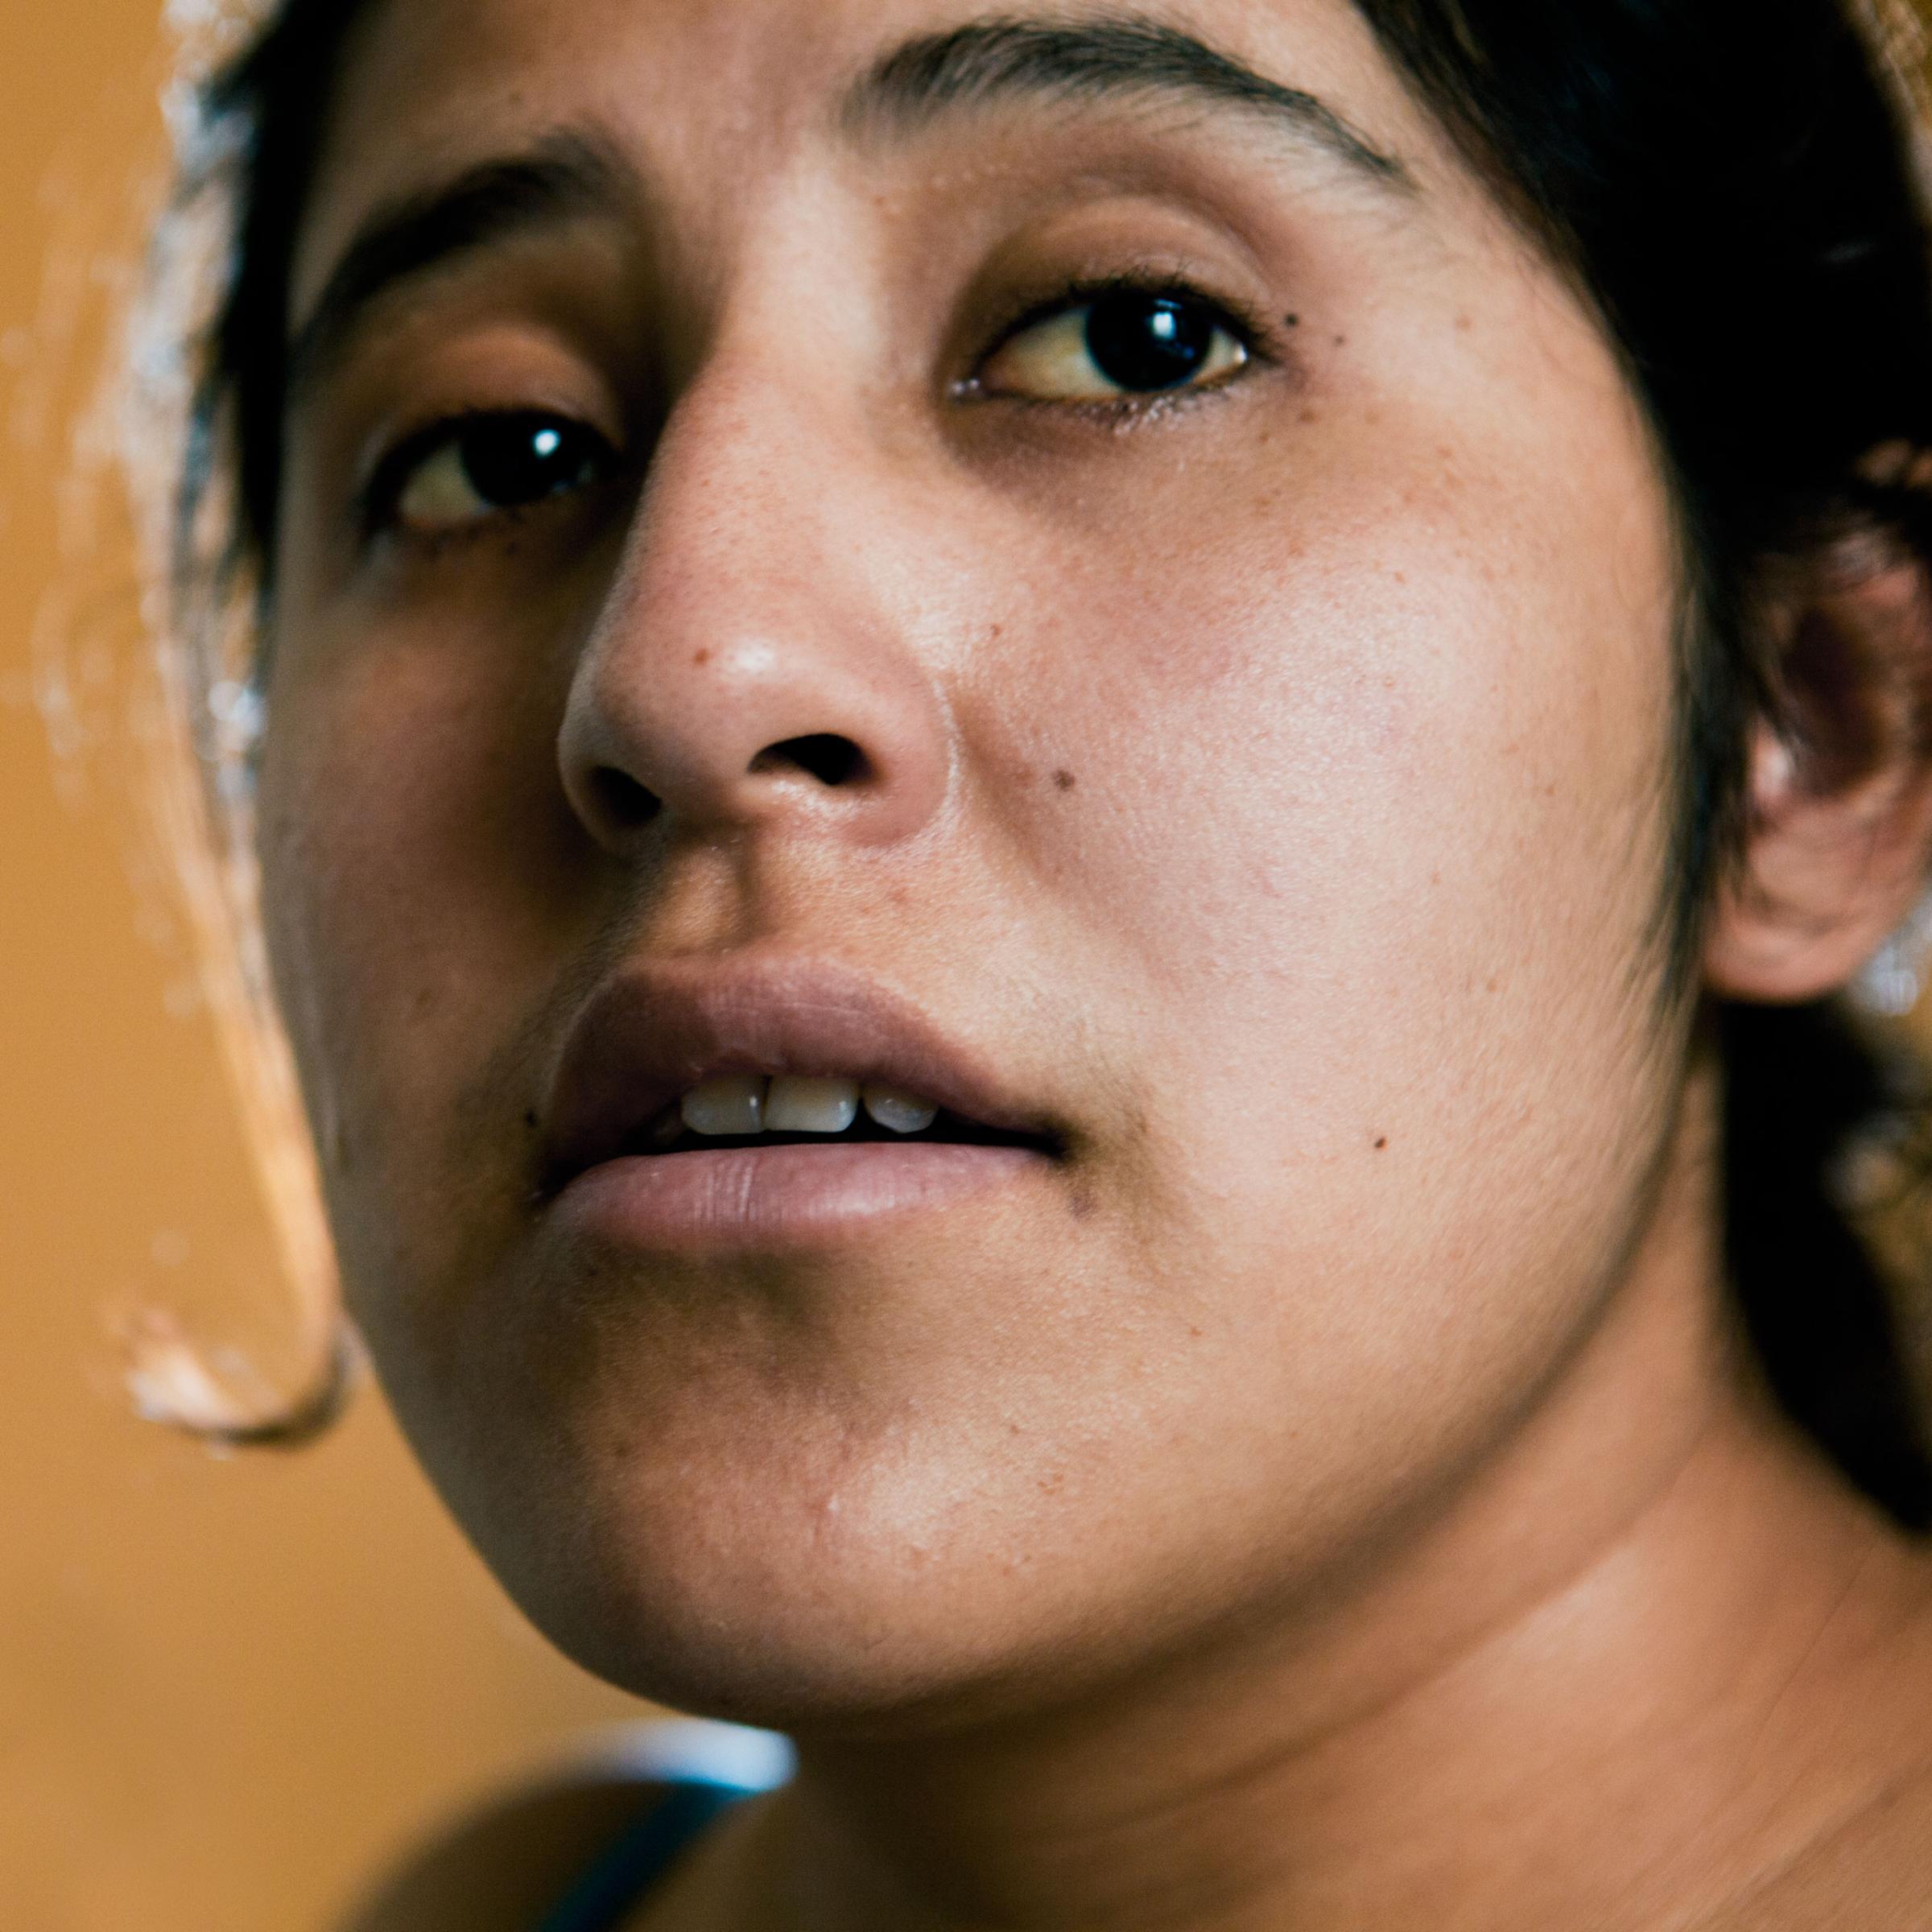 Juana Monter  (22) has been in the States for 4 years.  She is originary from  Zacualpan, a town in the state of Veracruz, México. Queens, NY, 2012.